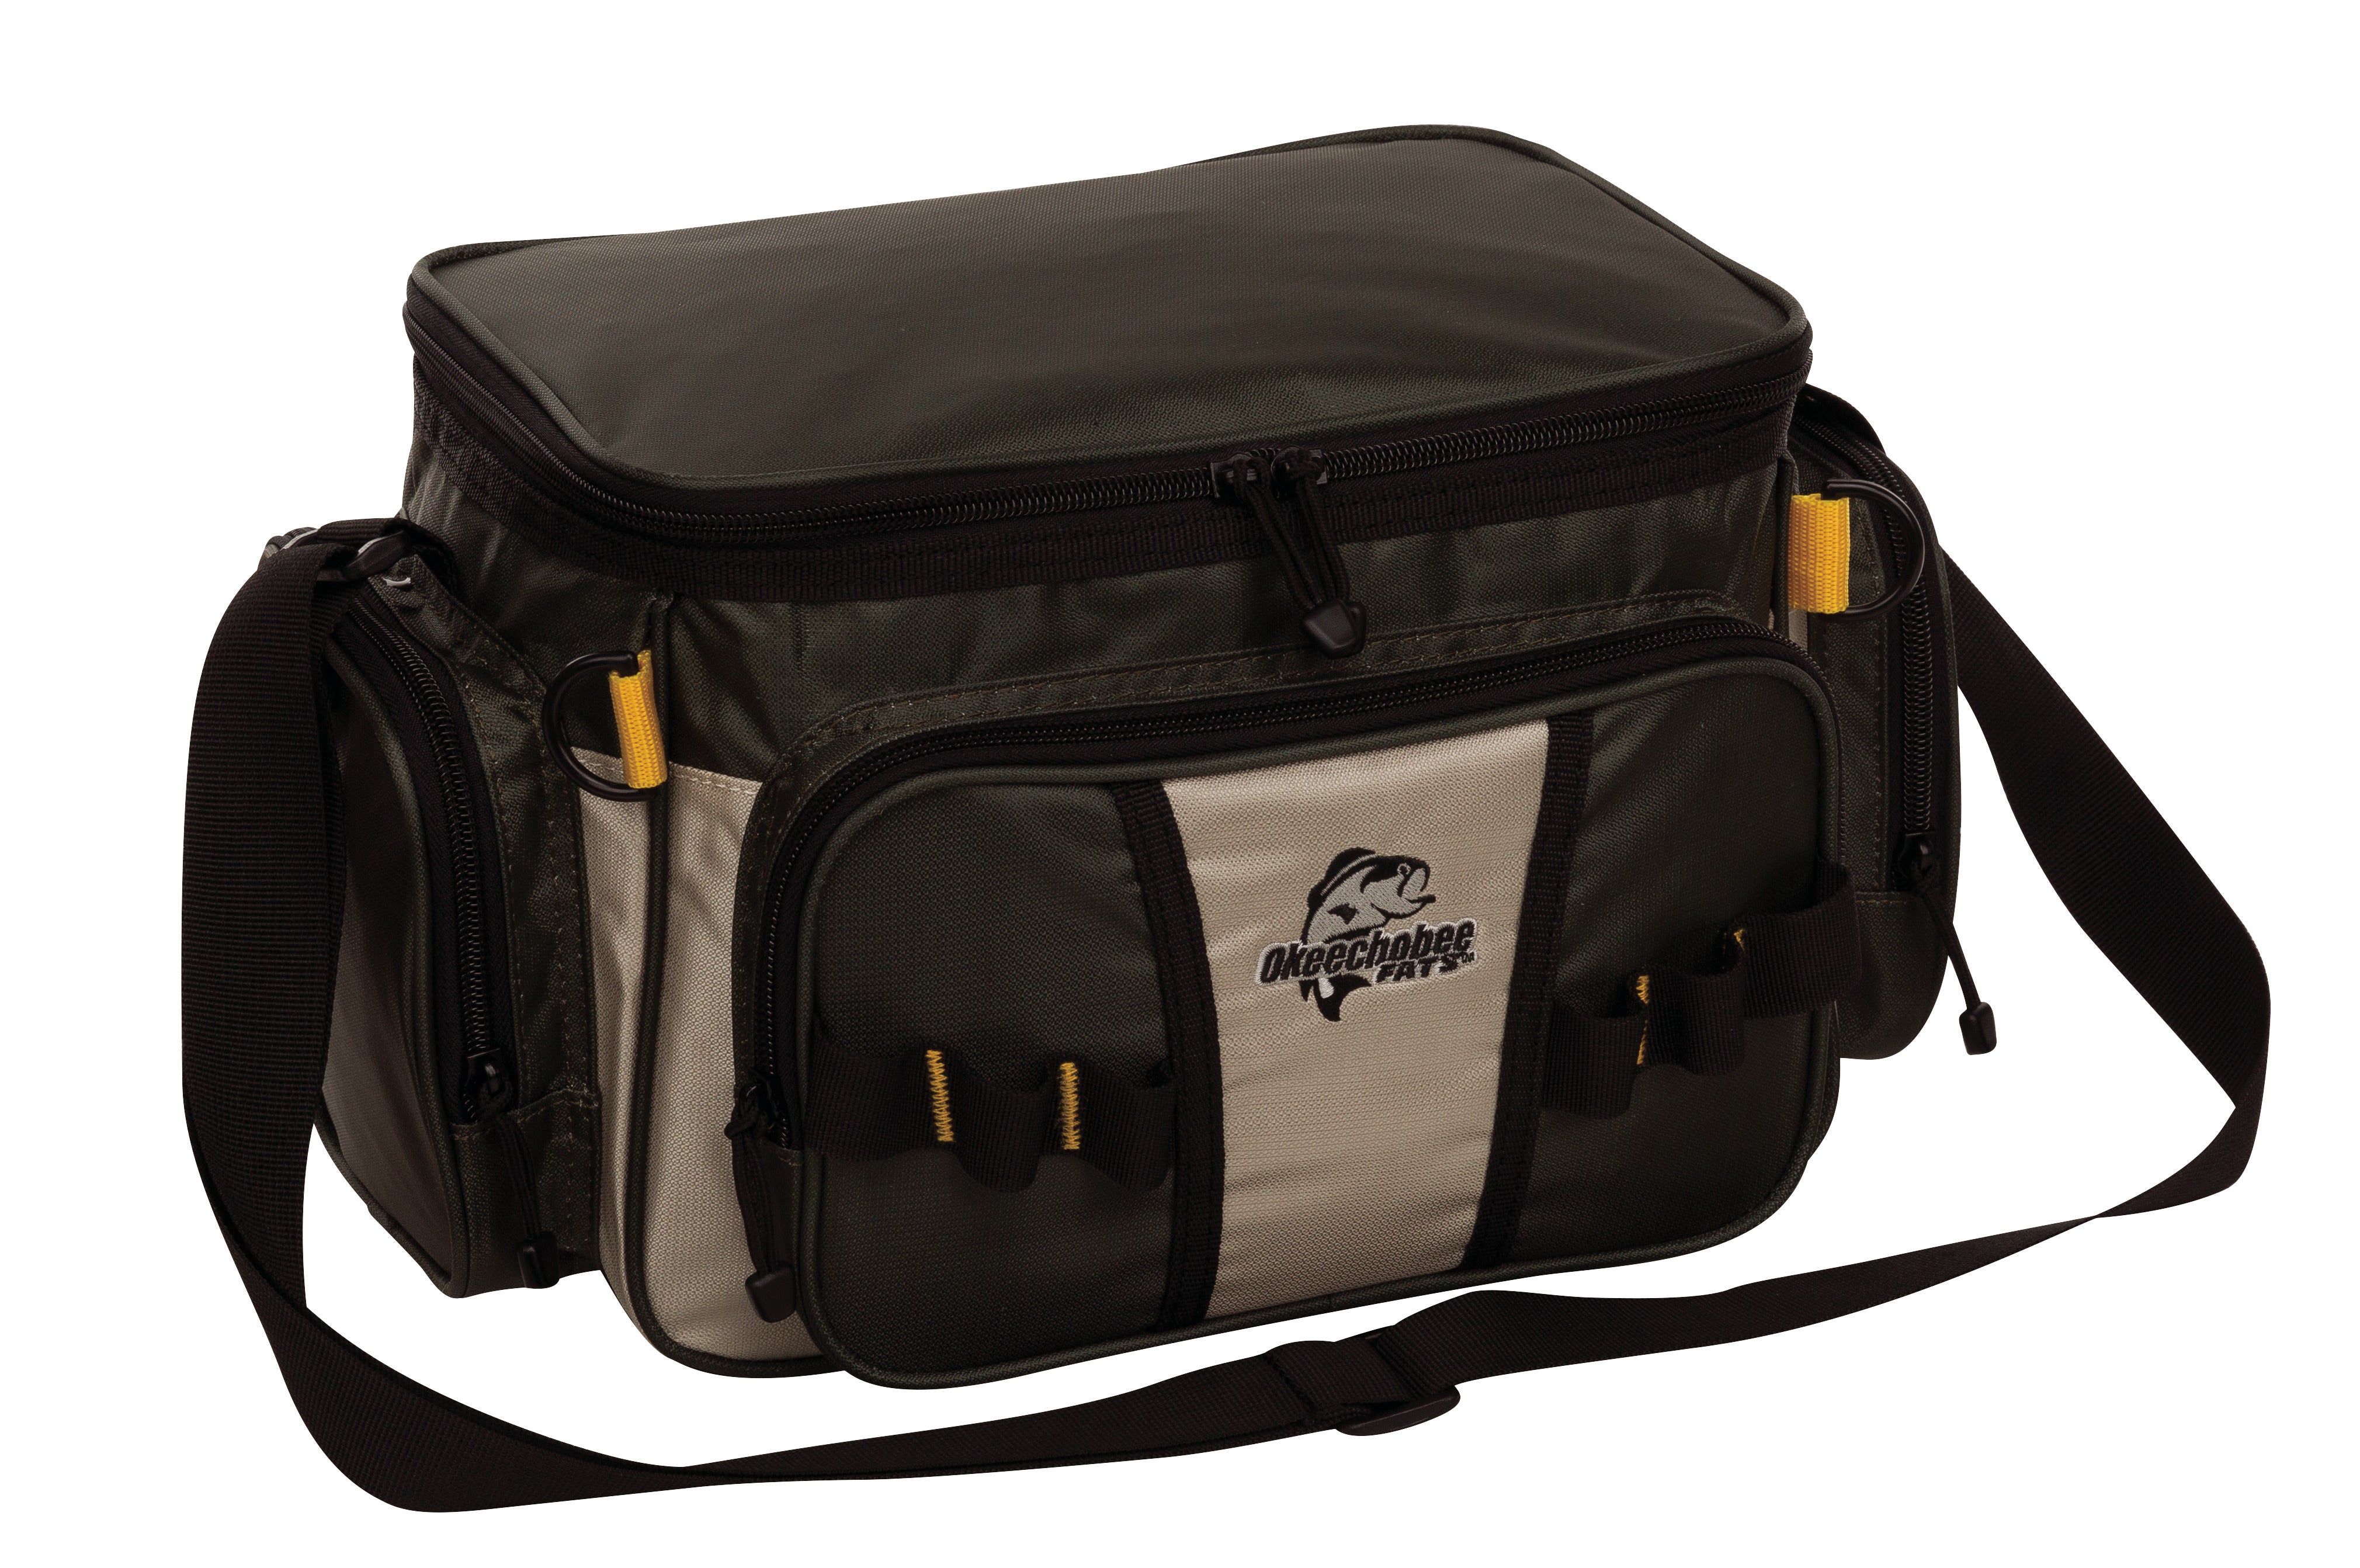 Okeechobee Fats Small Soft-Sided Fishing Tackle Bag with 2 Medium Lure Boxes, Polyester - Sagebrush